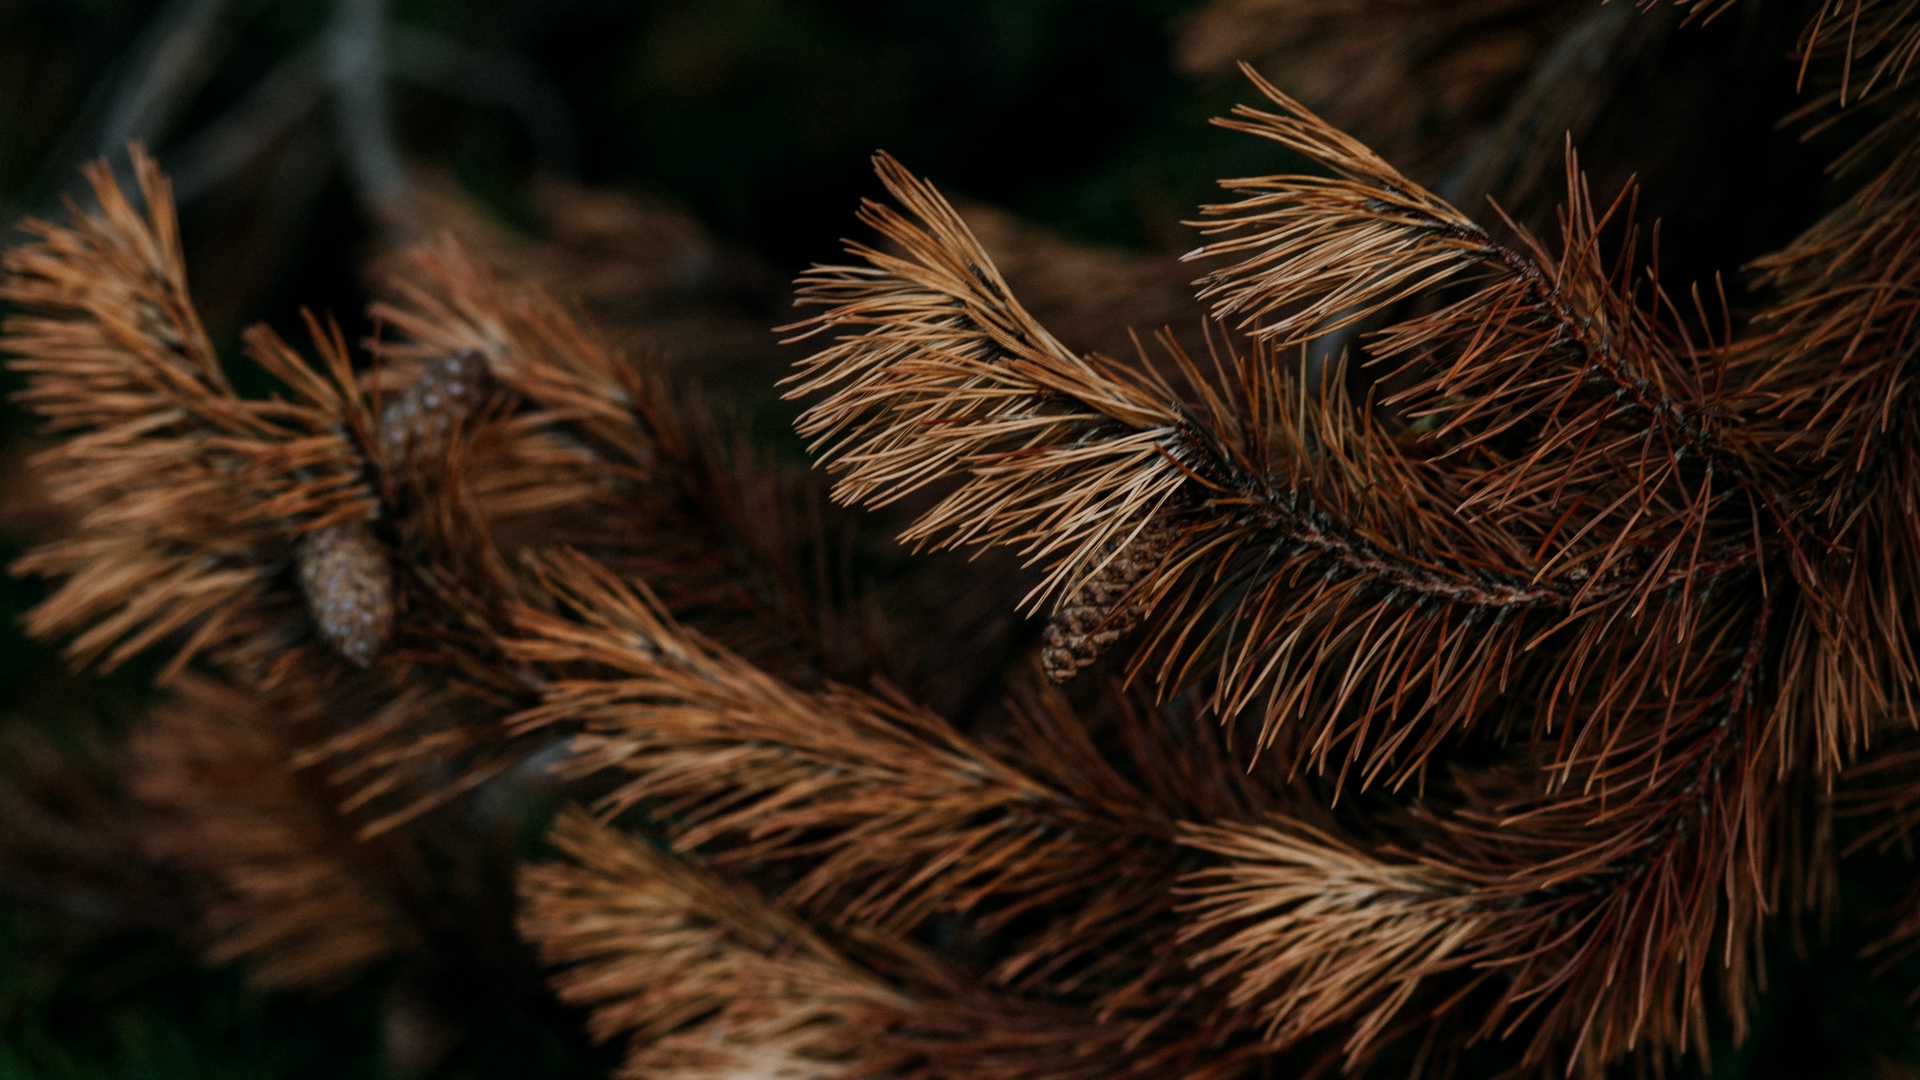 General 1920x1080 nature plants leaves dry  needles pine trees